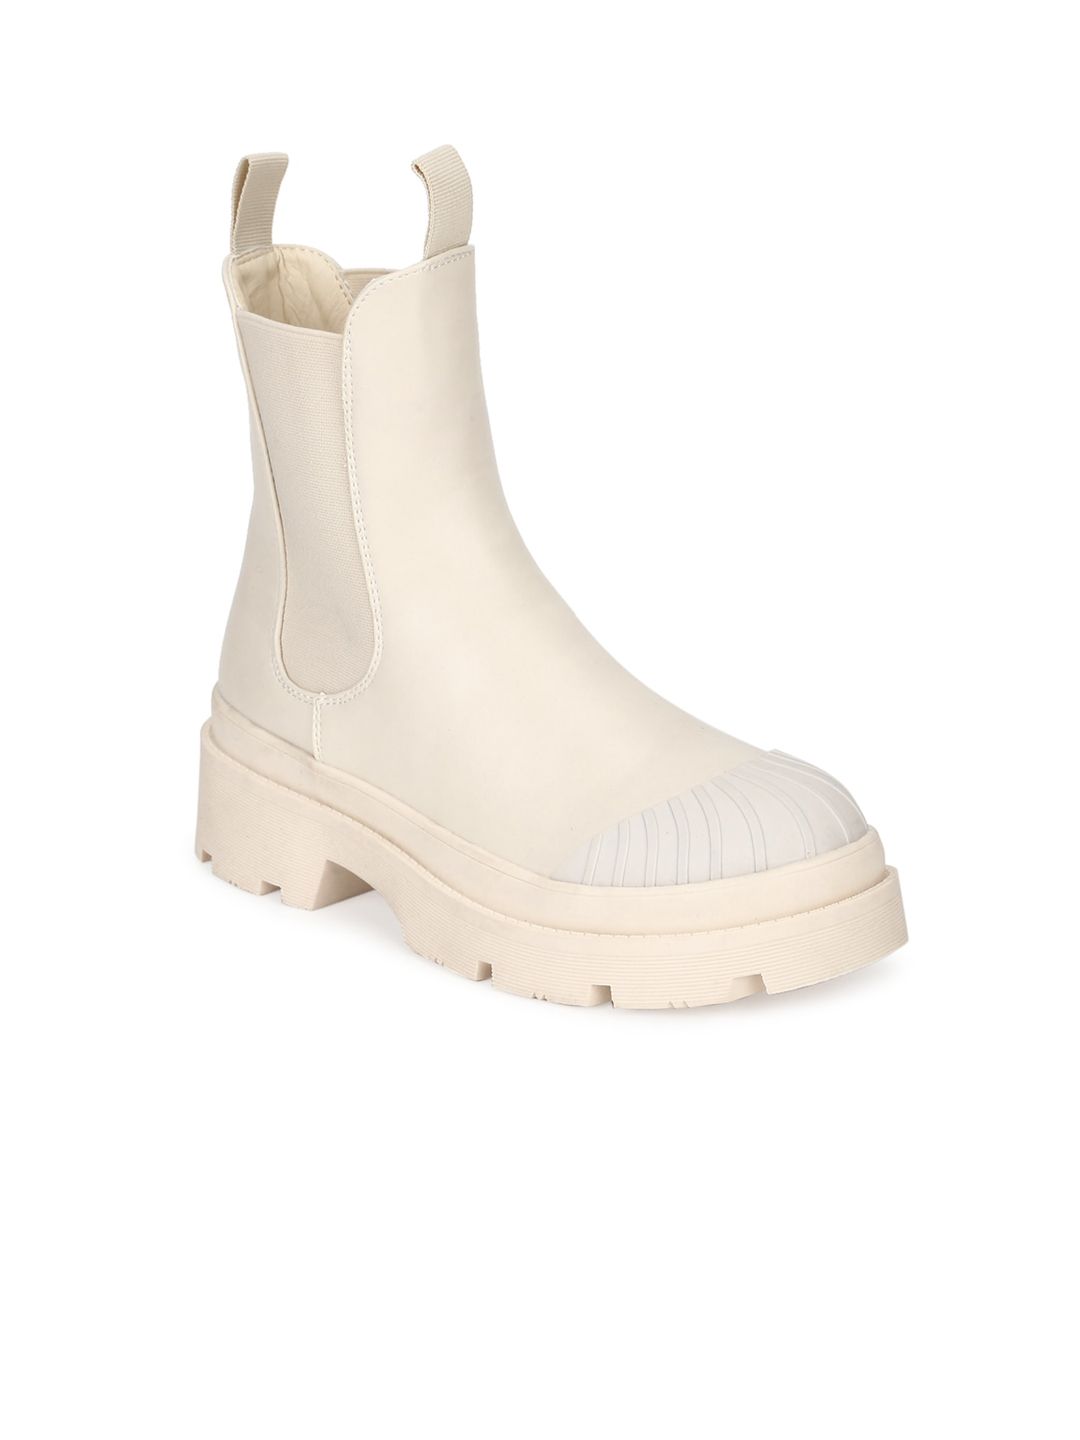 Truffle Collection Beige Textured Platform Heeled Boots Price in India